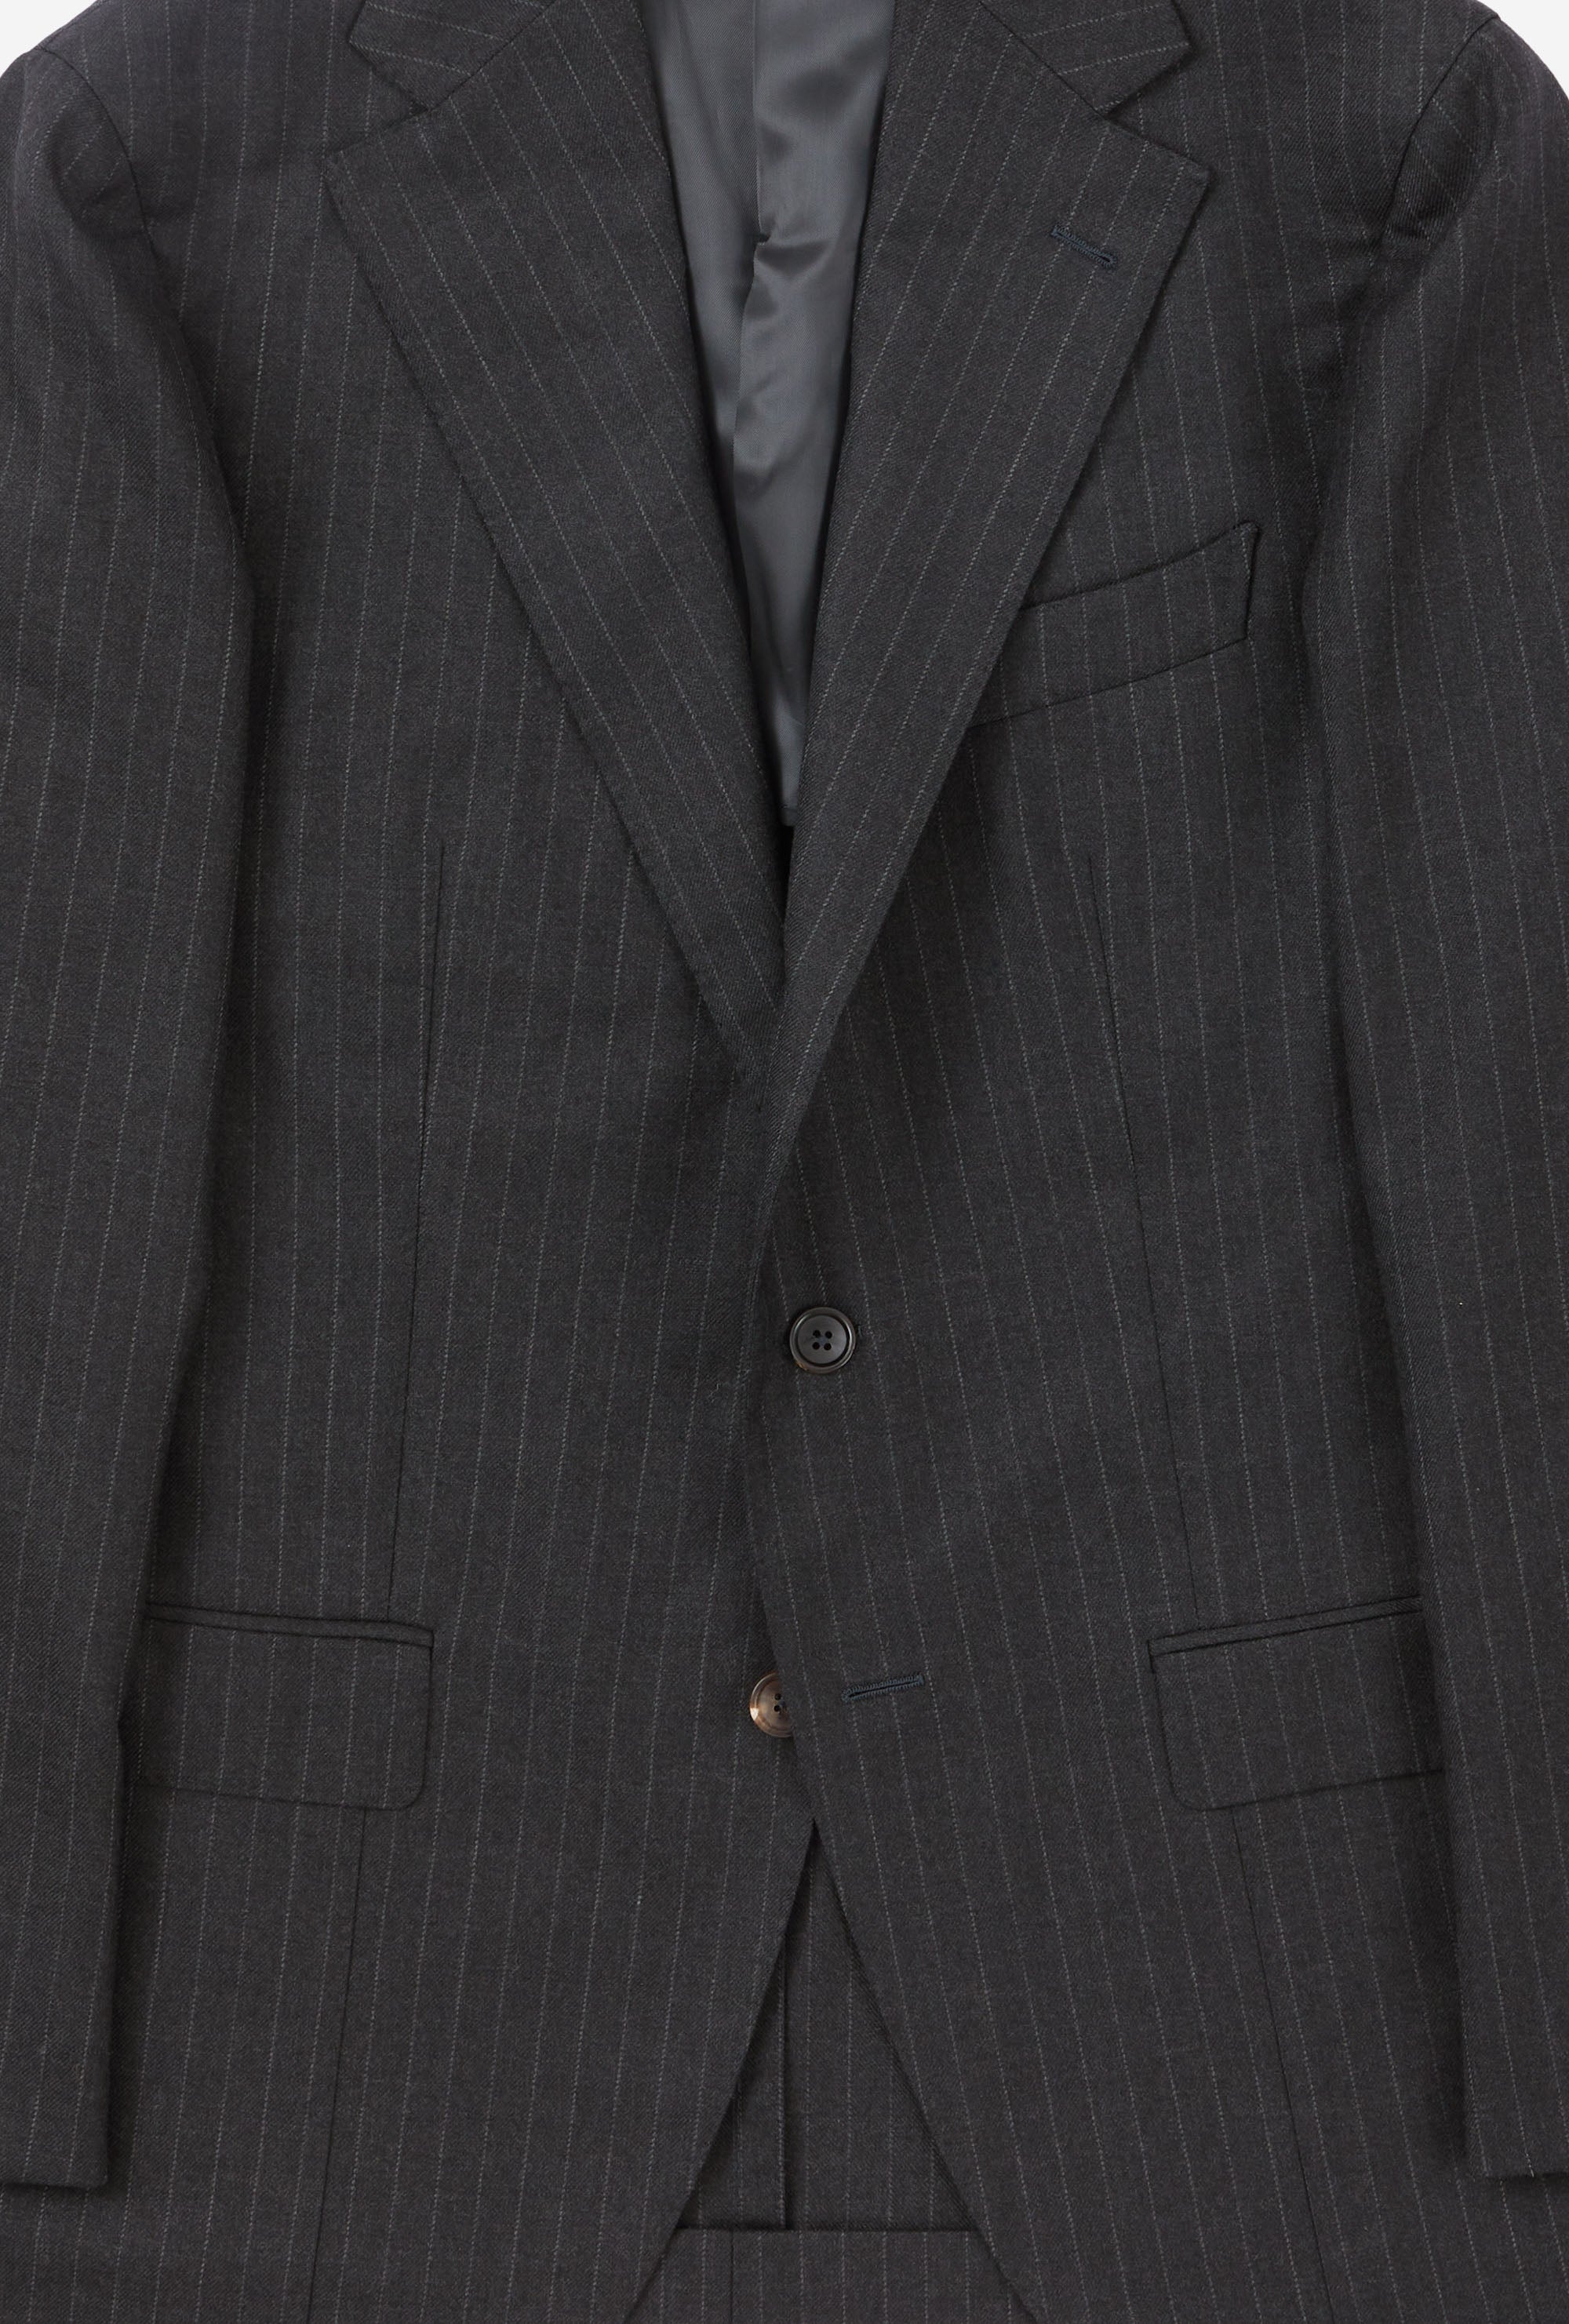 Suit Single Breasted Charcoal Chalk Stripe Wool